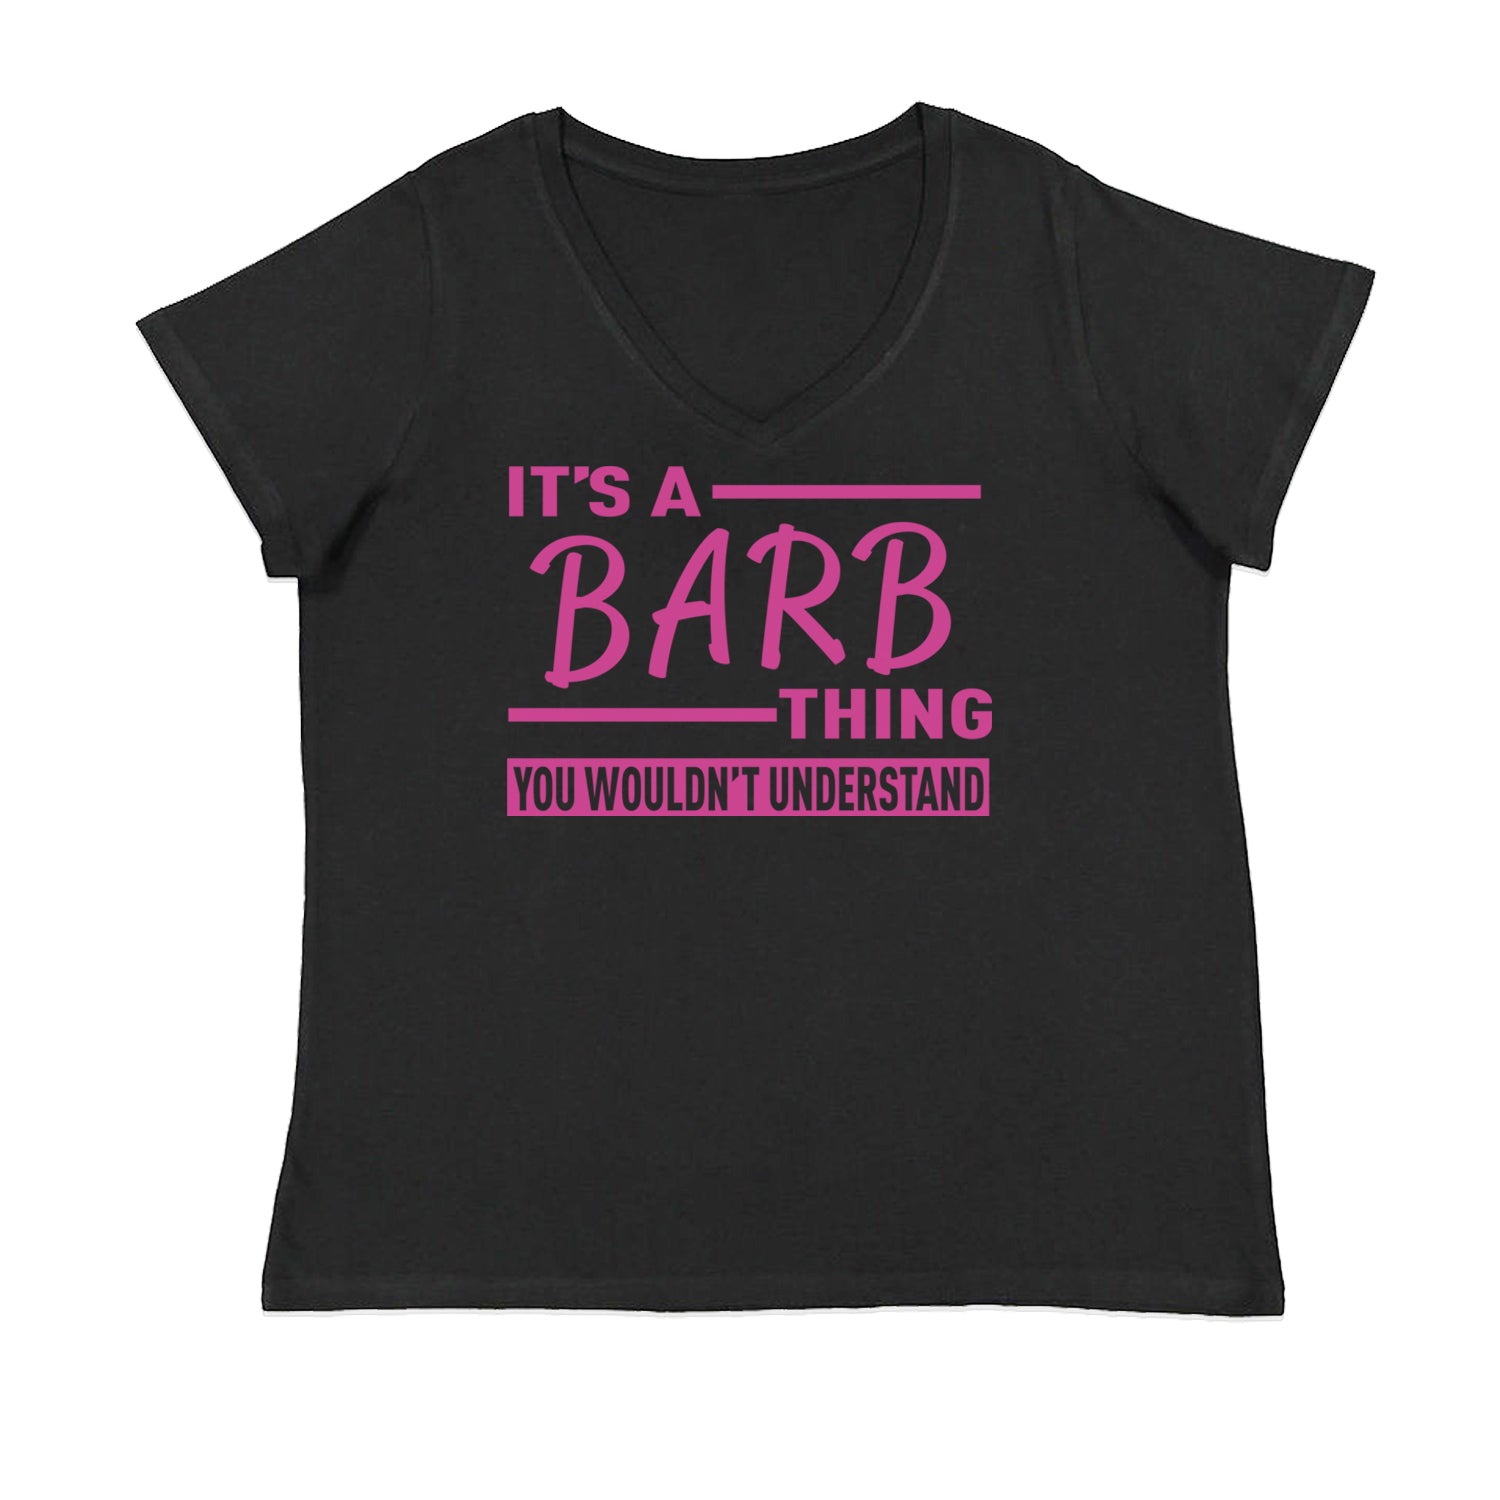 It's A Barb Thing, You Wouldn't Understand Womens Plus Size V-Neck T-shirt